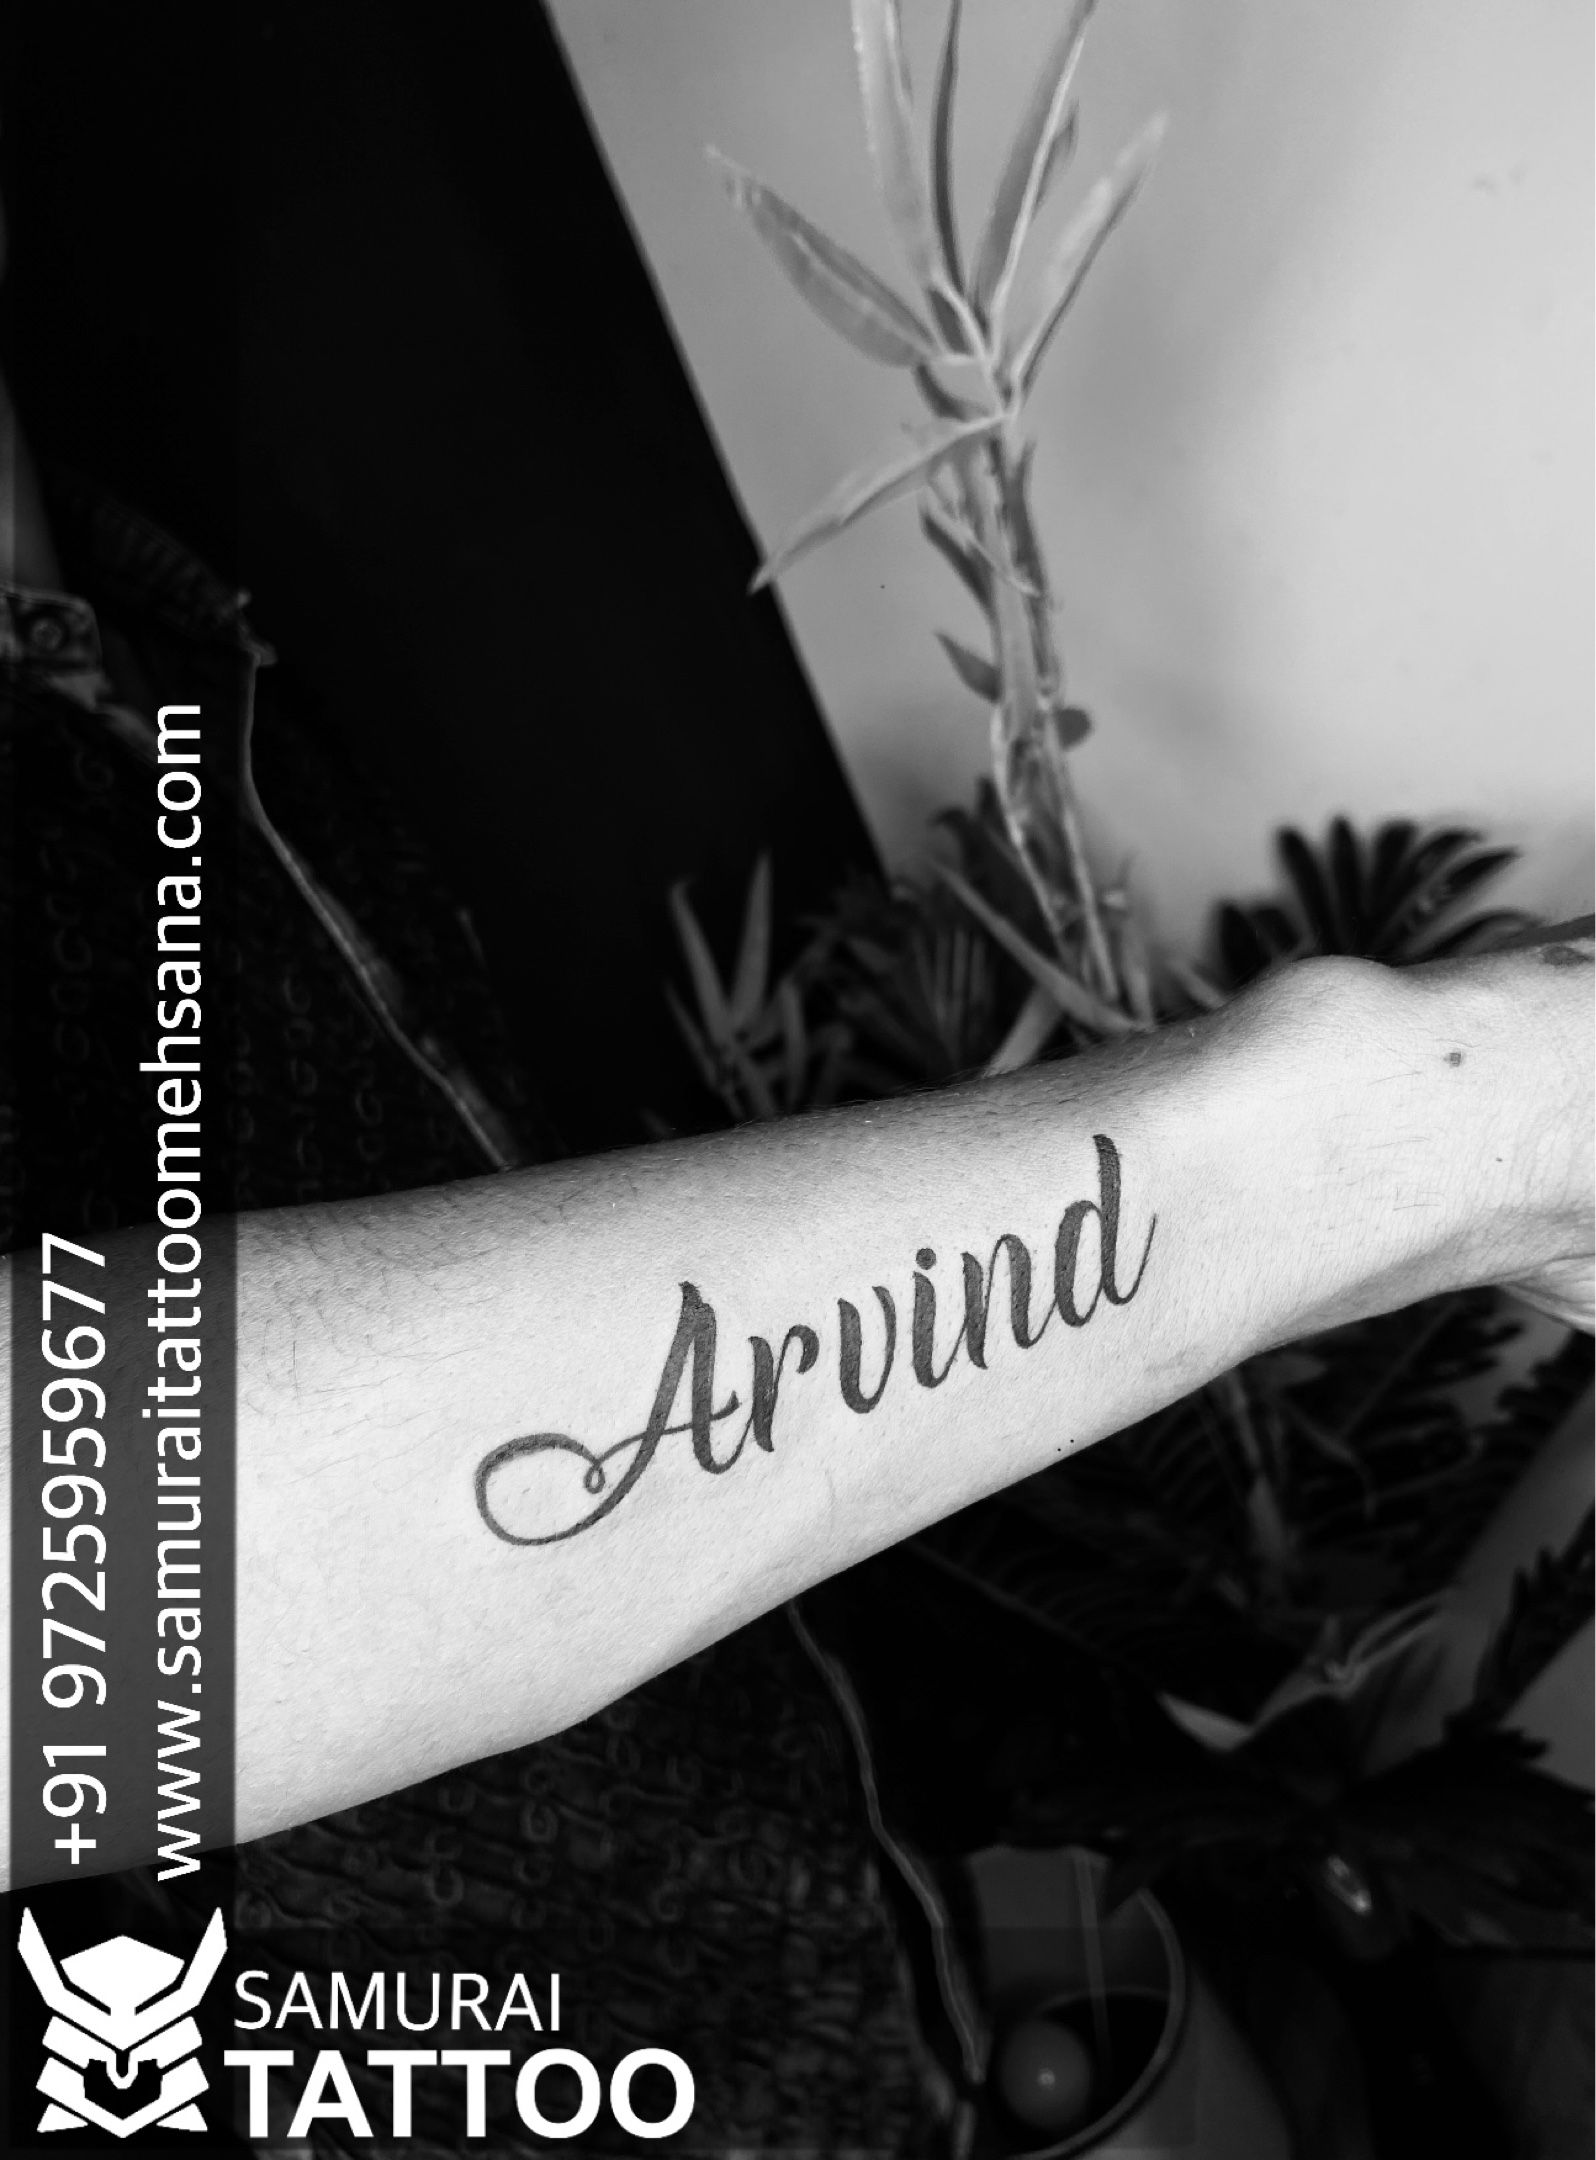 Pin by Dream on Get Inked!!! | Tattoos for lovers, Tattoo designs wrist,  Shiva tattoo design